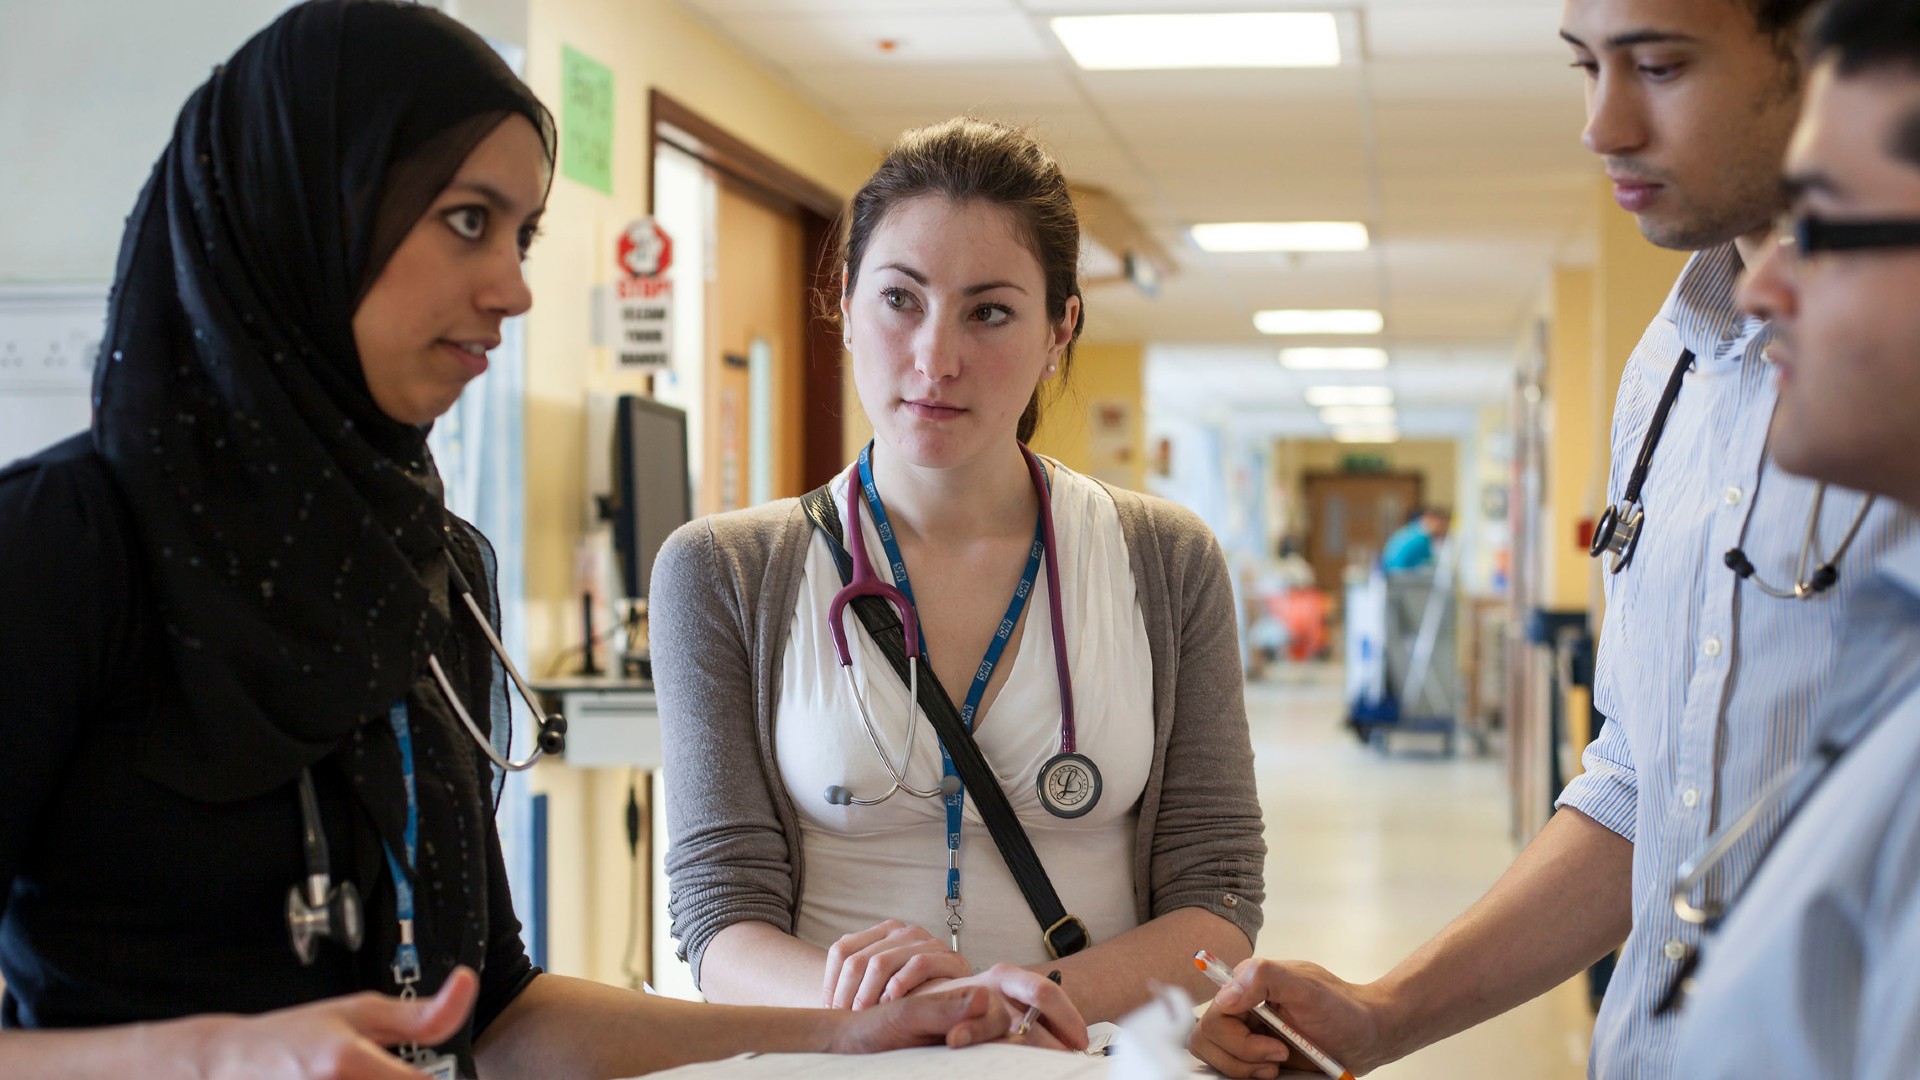 4 people are stood around a stack of paper, they are stood inside a well-lit corridor. All people in the photo are wearing stethoscopes.